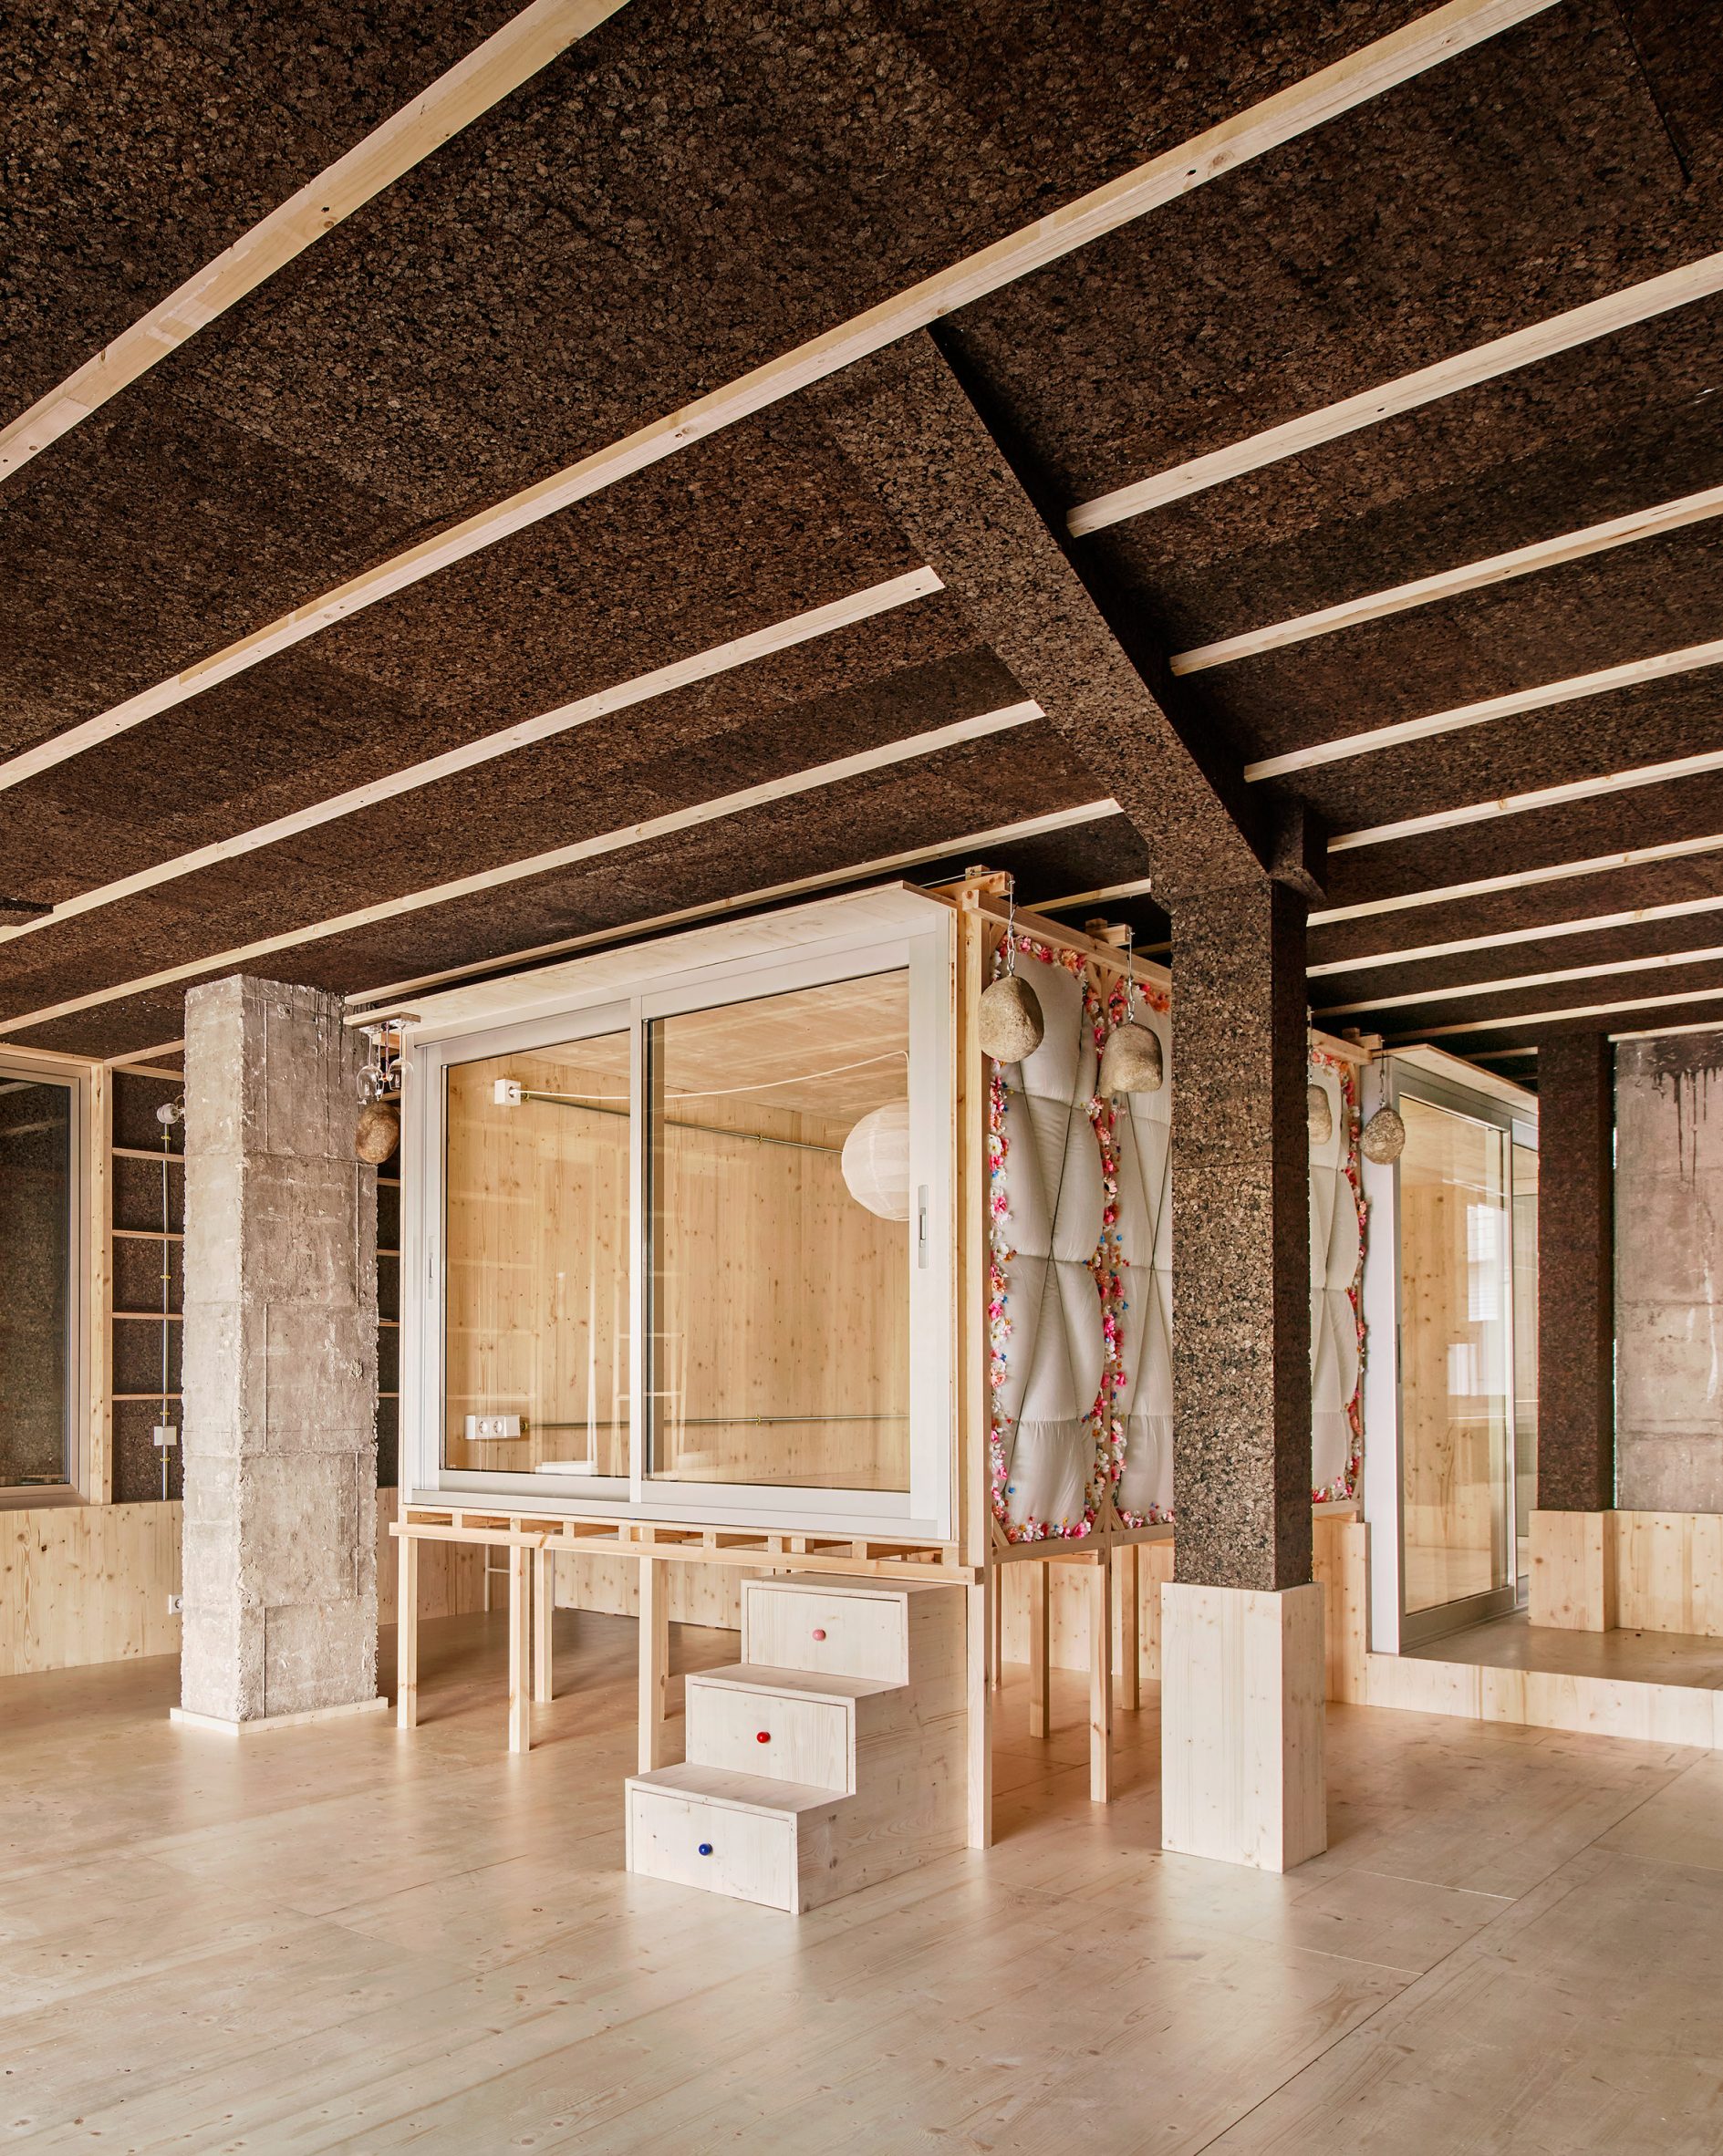 Bedroom in a wooden box raised on stilts in a cork-clad apartment by Takk